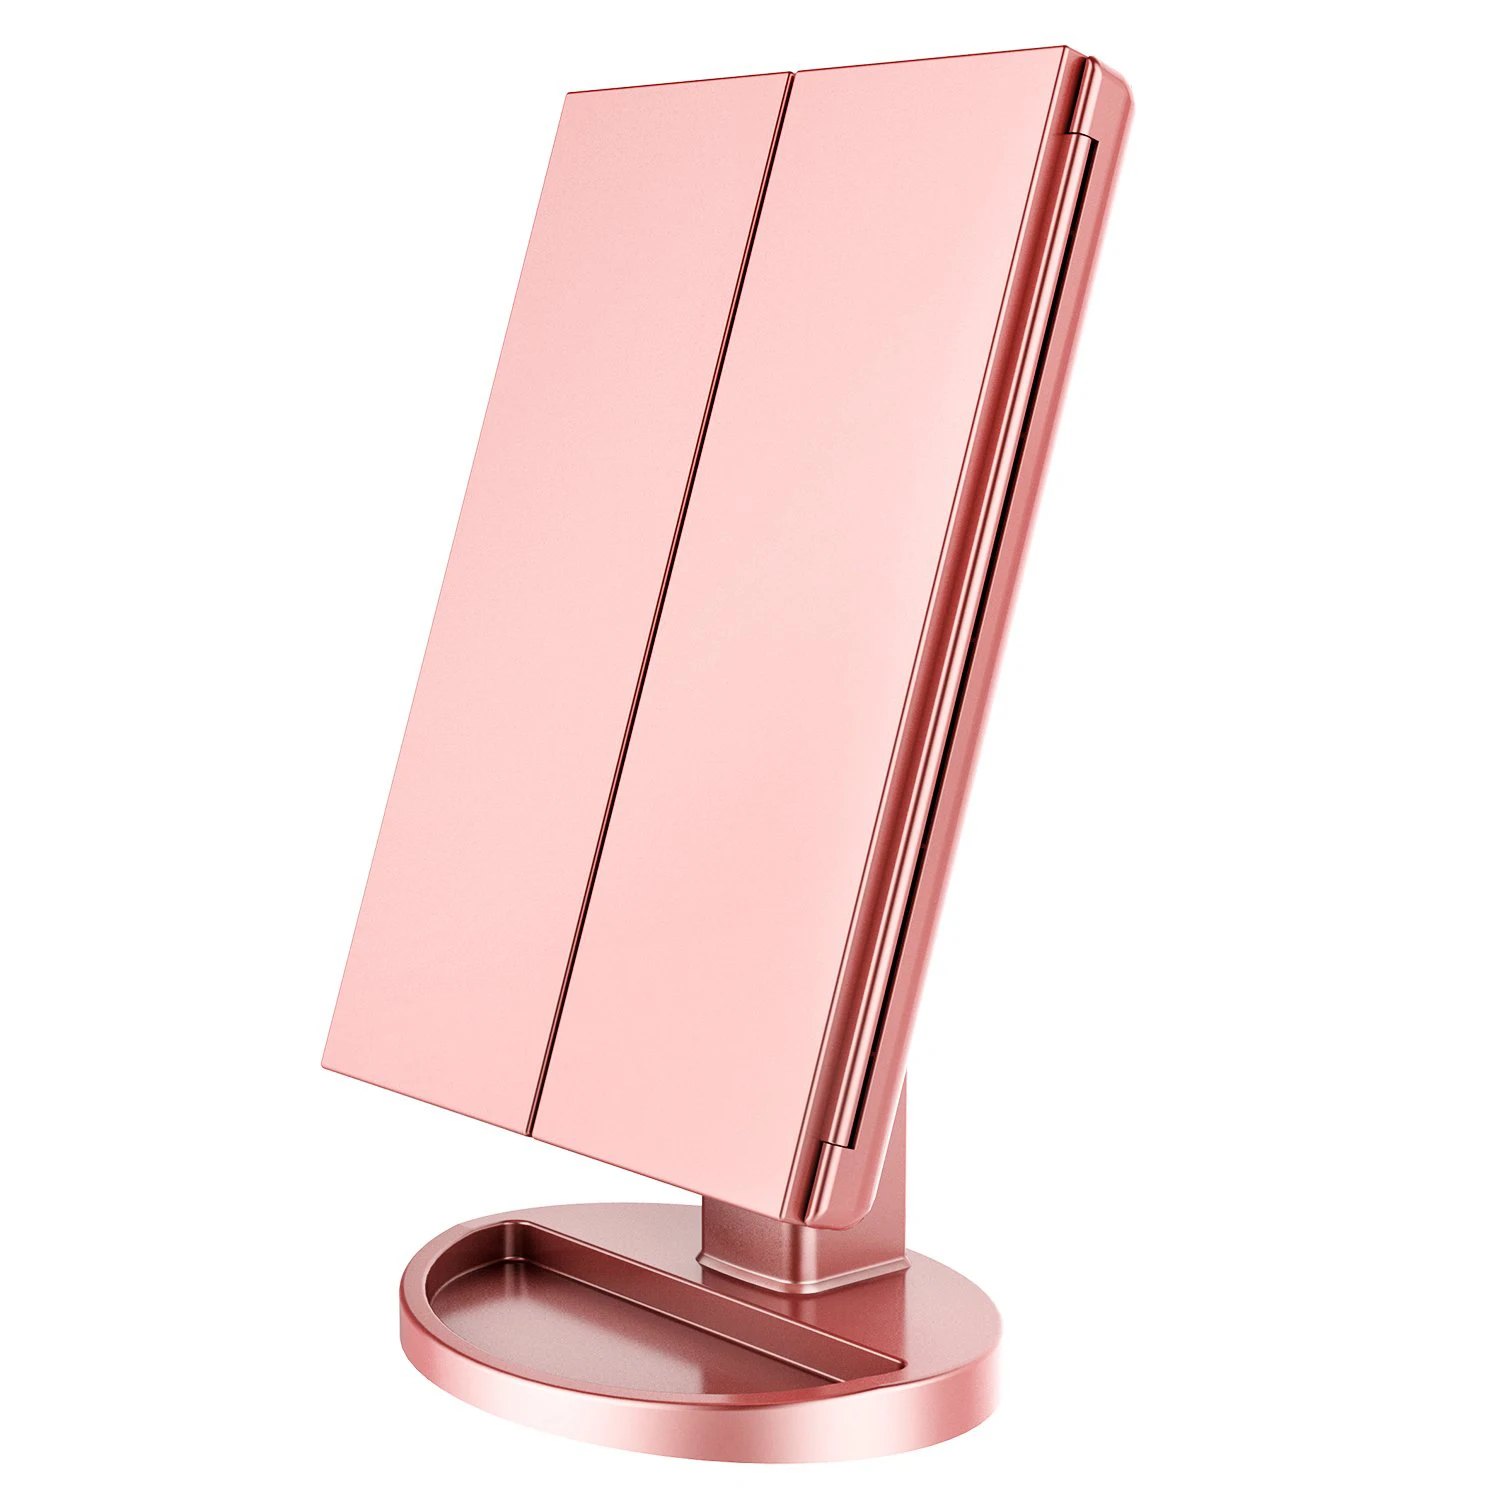 

Portable Trifold Makeup Mirror with 1x 2x 3x Magnification, Vanity LED Makeup Mirror with Lights Touch Screen Switch For Women, Pink white black